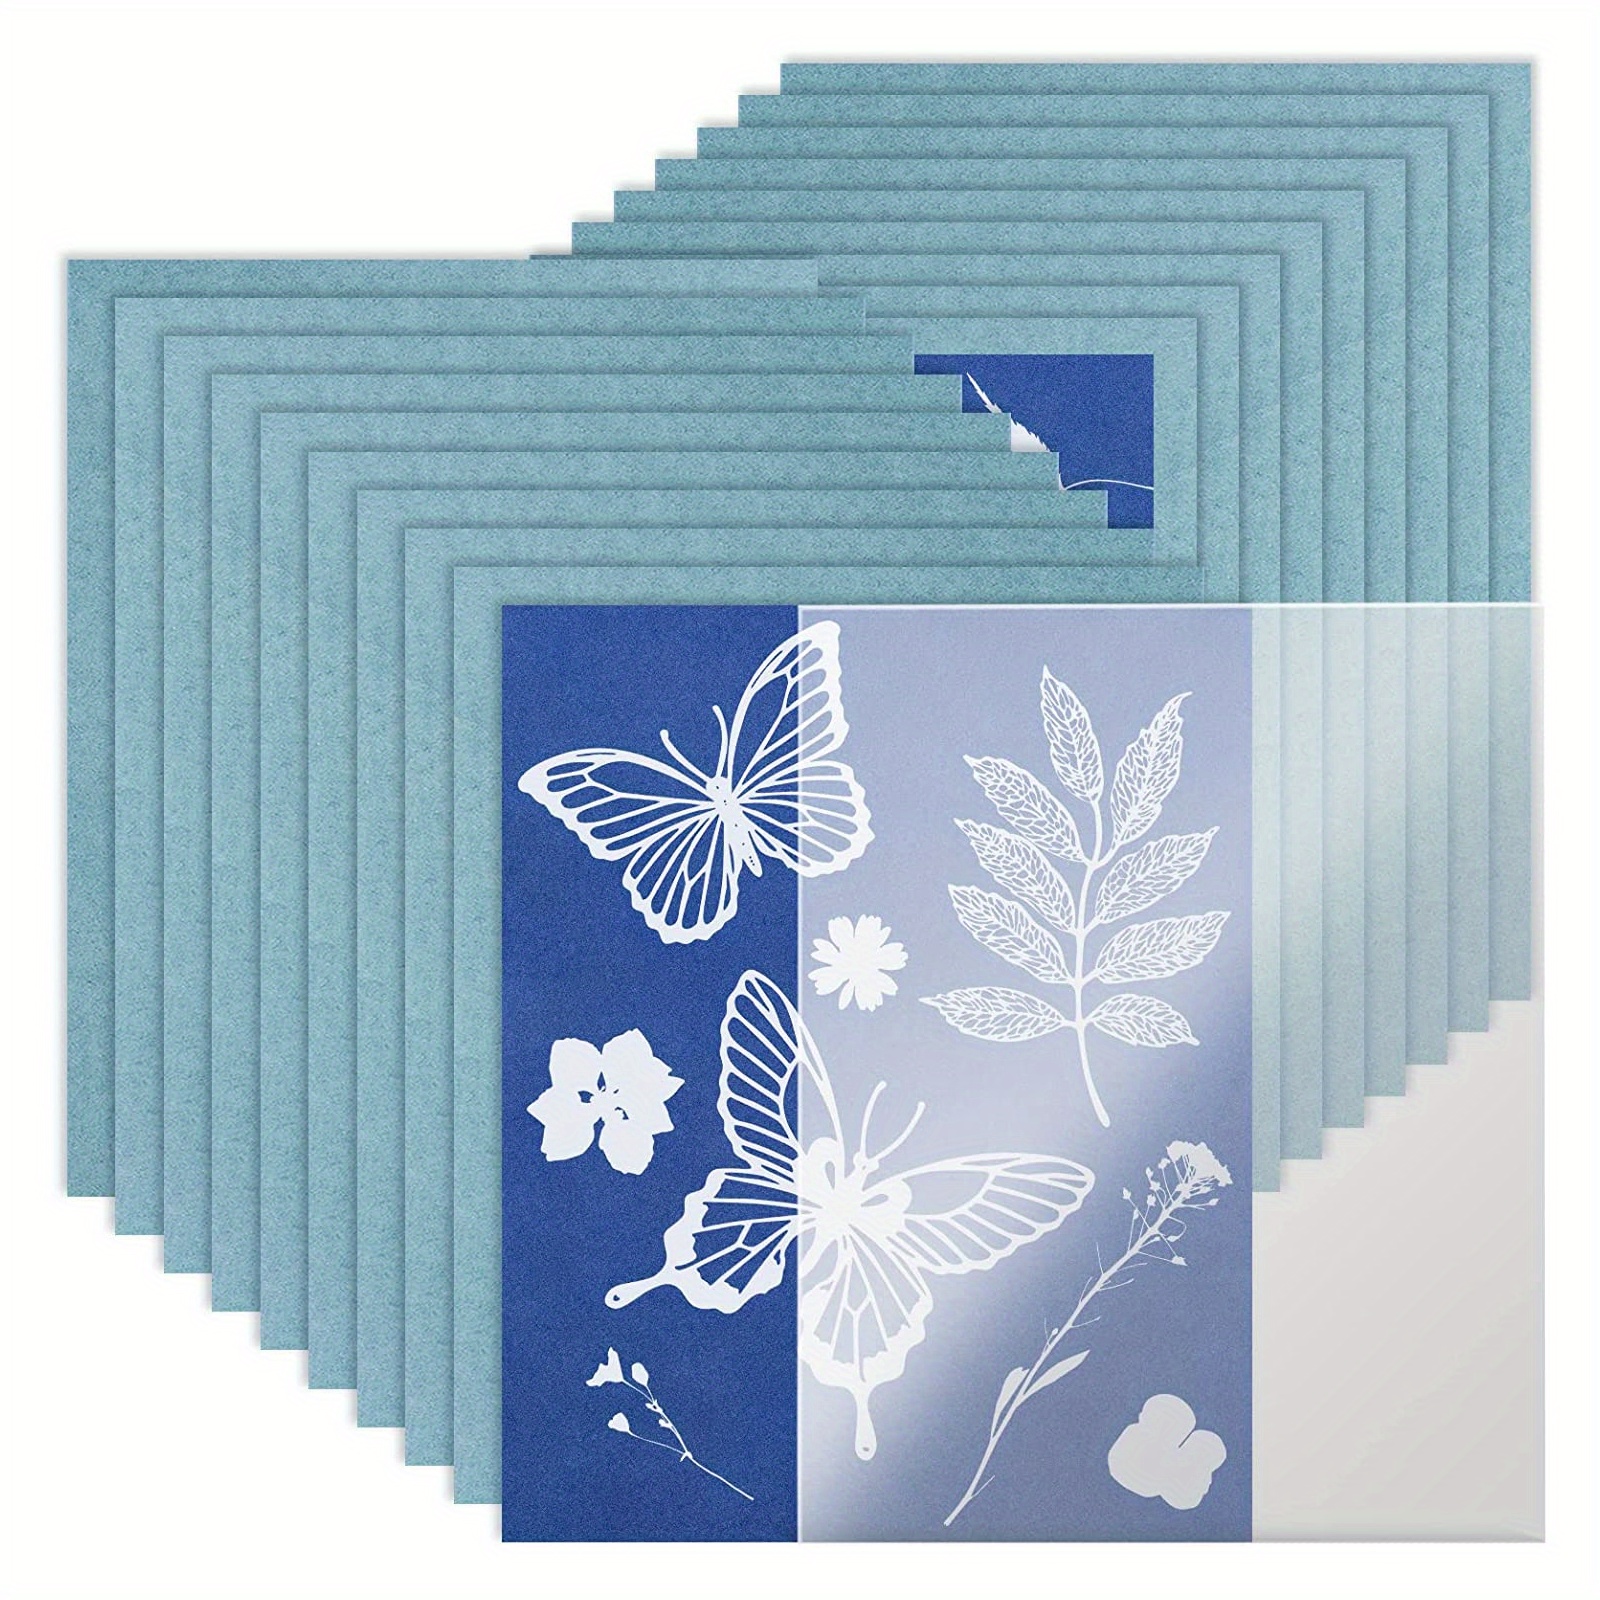 Cyanotype Paper - 32 Sheets Cyanotype Papers With 1 Sheet Acrylic Panel -  High Sensitivity Nature Printing Paper Cyanotype Paper For Diy Arts Crafts  P